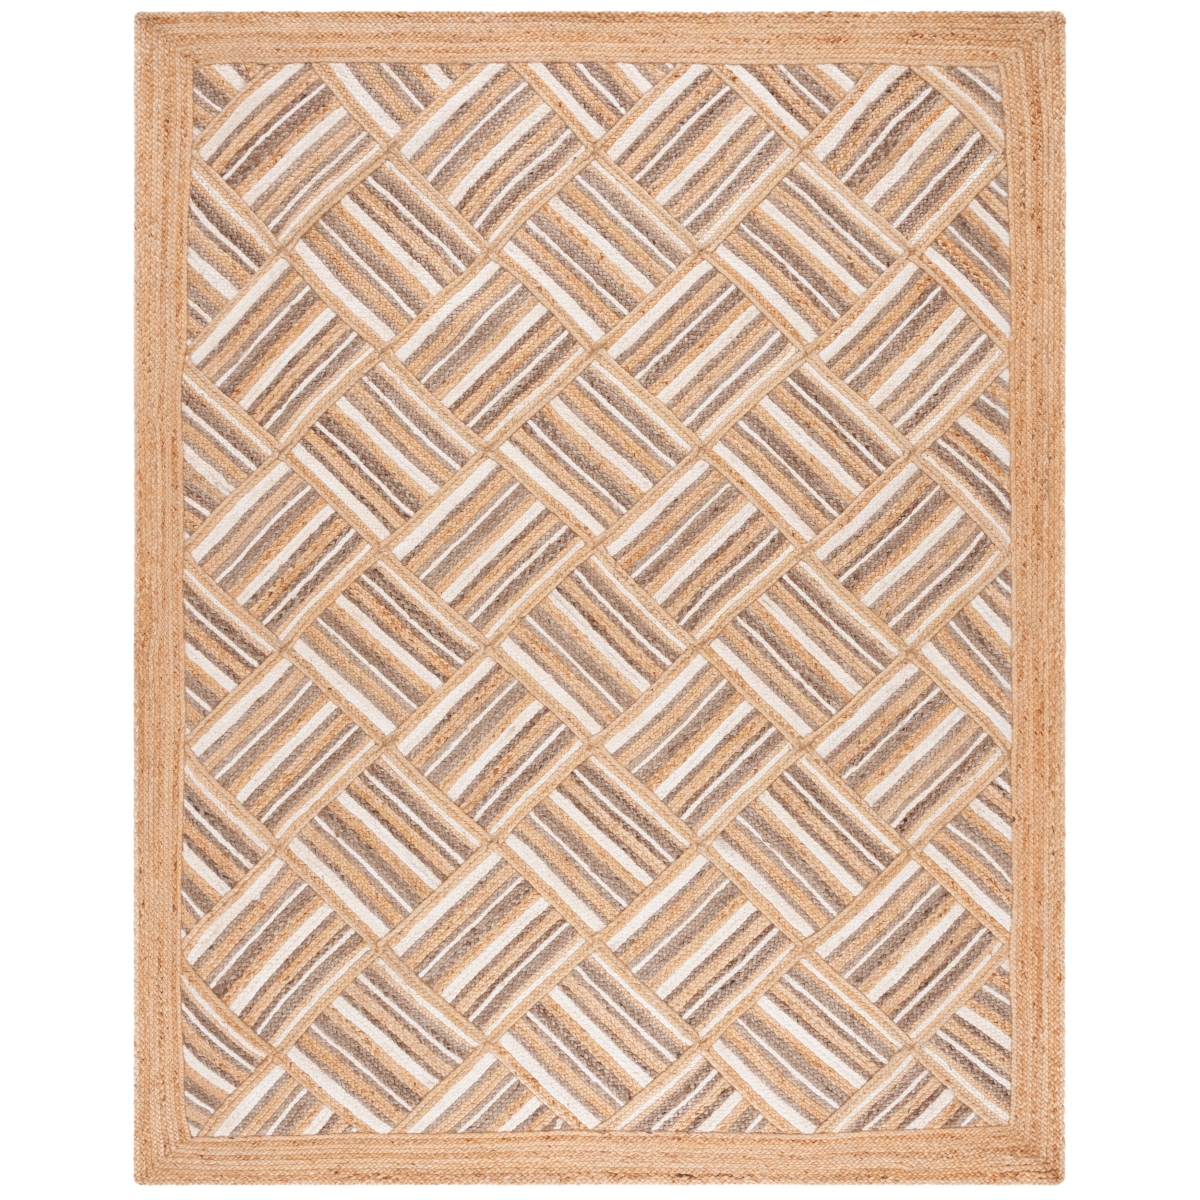 Picture of Safavieh NF897A-6SQ 6 x 6 ft. Natural Fiber Rugin Hand Woven Global Square Area Rug&#44; Natural & Grey